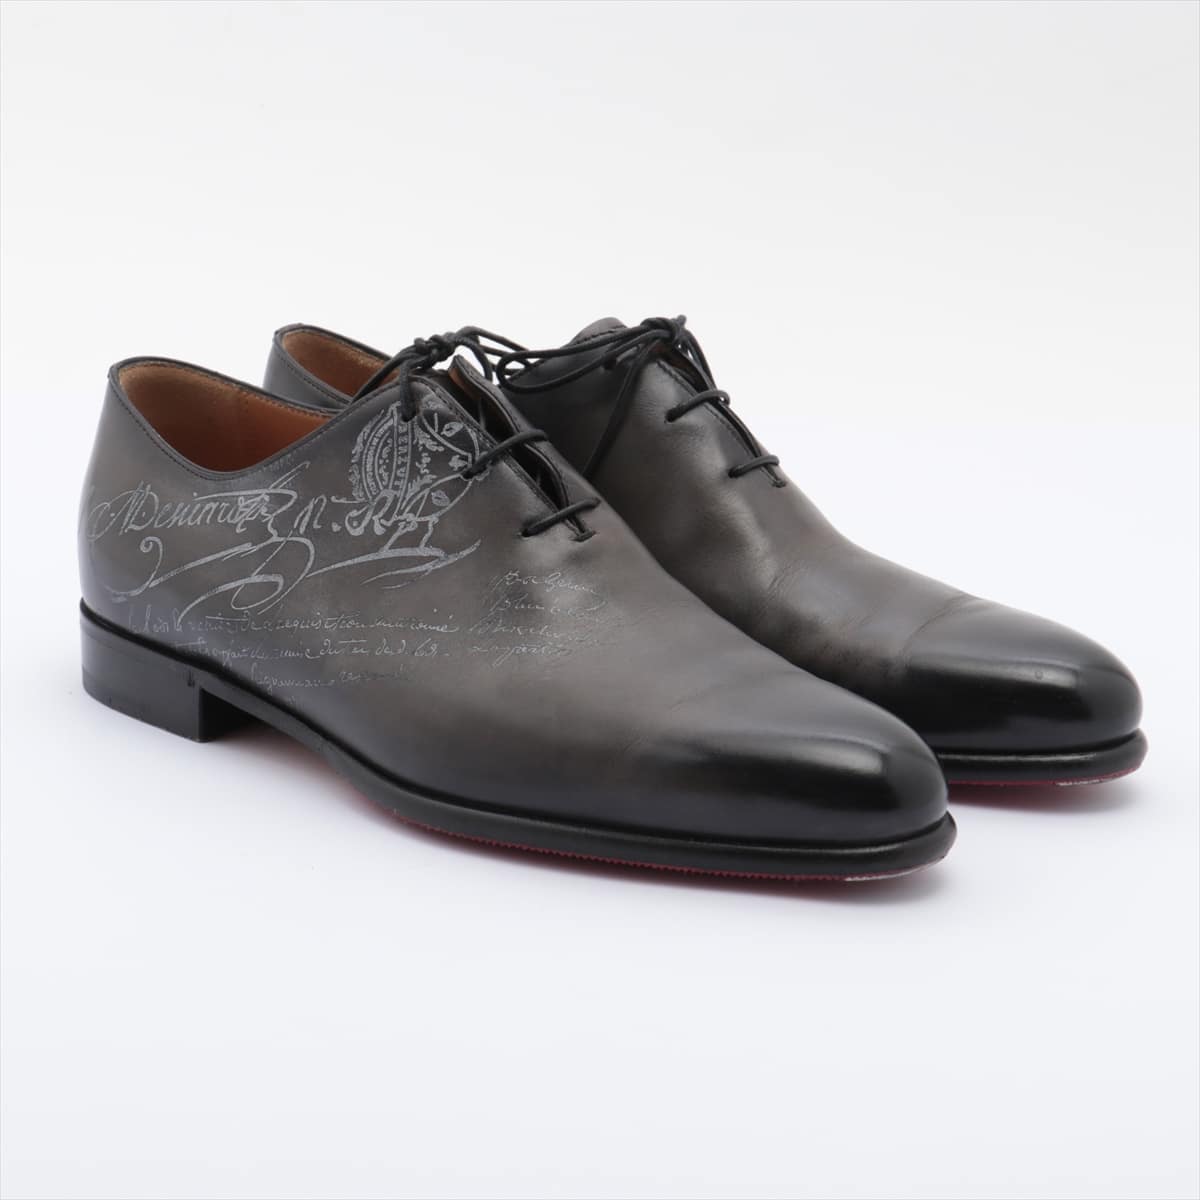 Berluti Calligraphy Leather Shoes 5 1/2 Men's Black With genuine shoe tree